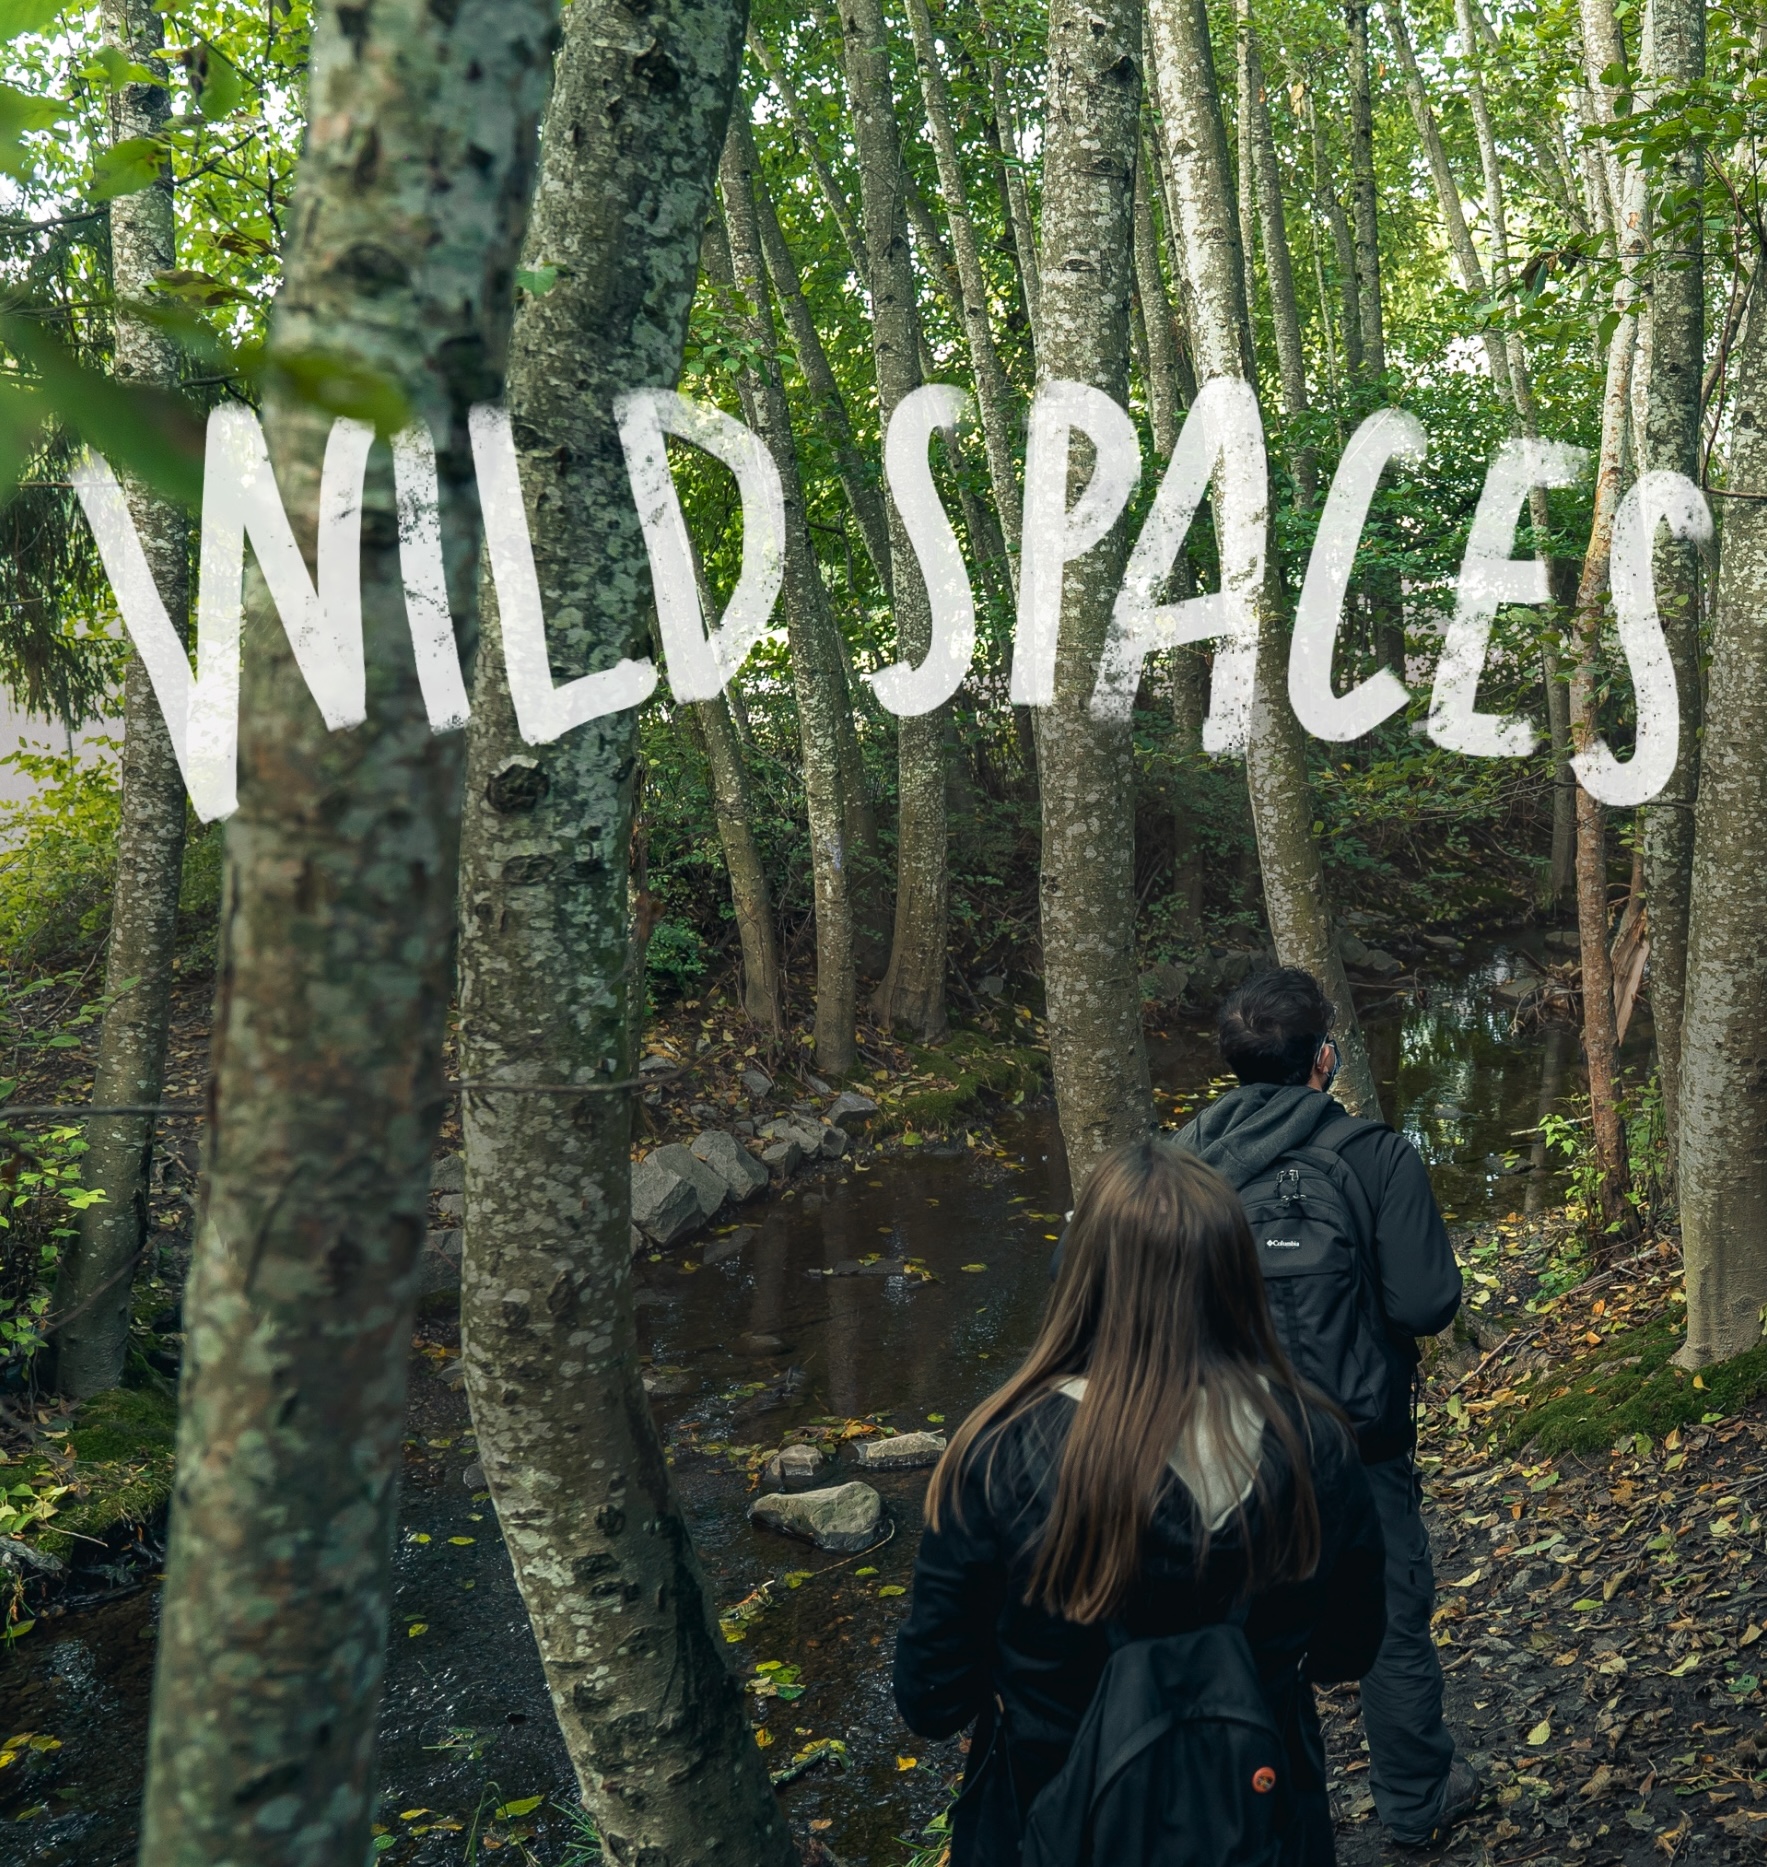 Image of a forest with two individuals in the frame and the words "Wild Spaces" drawn across